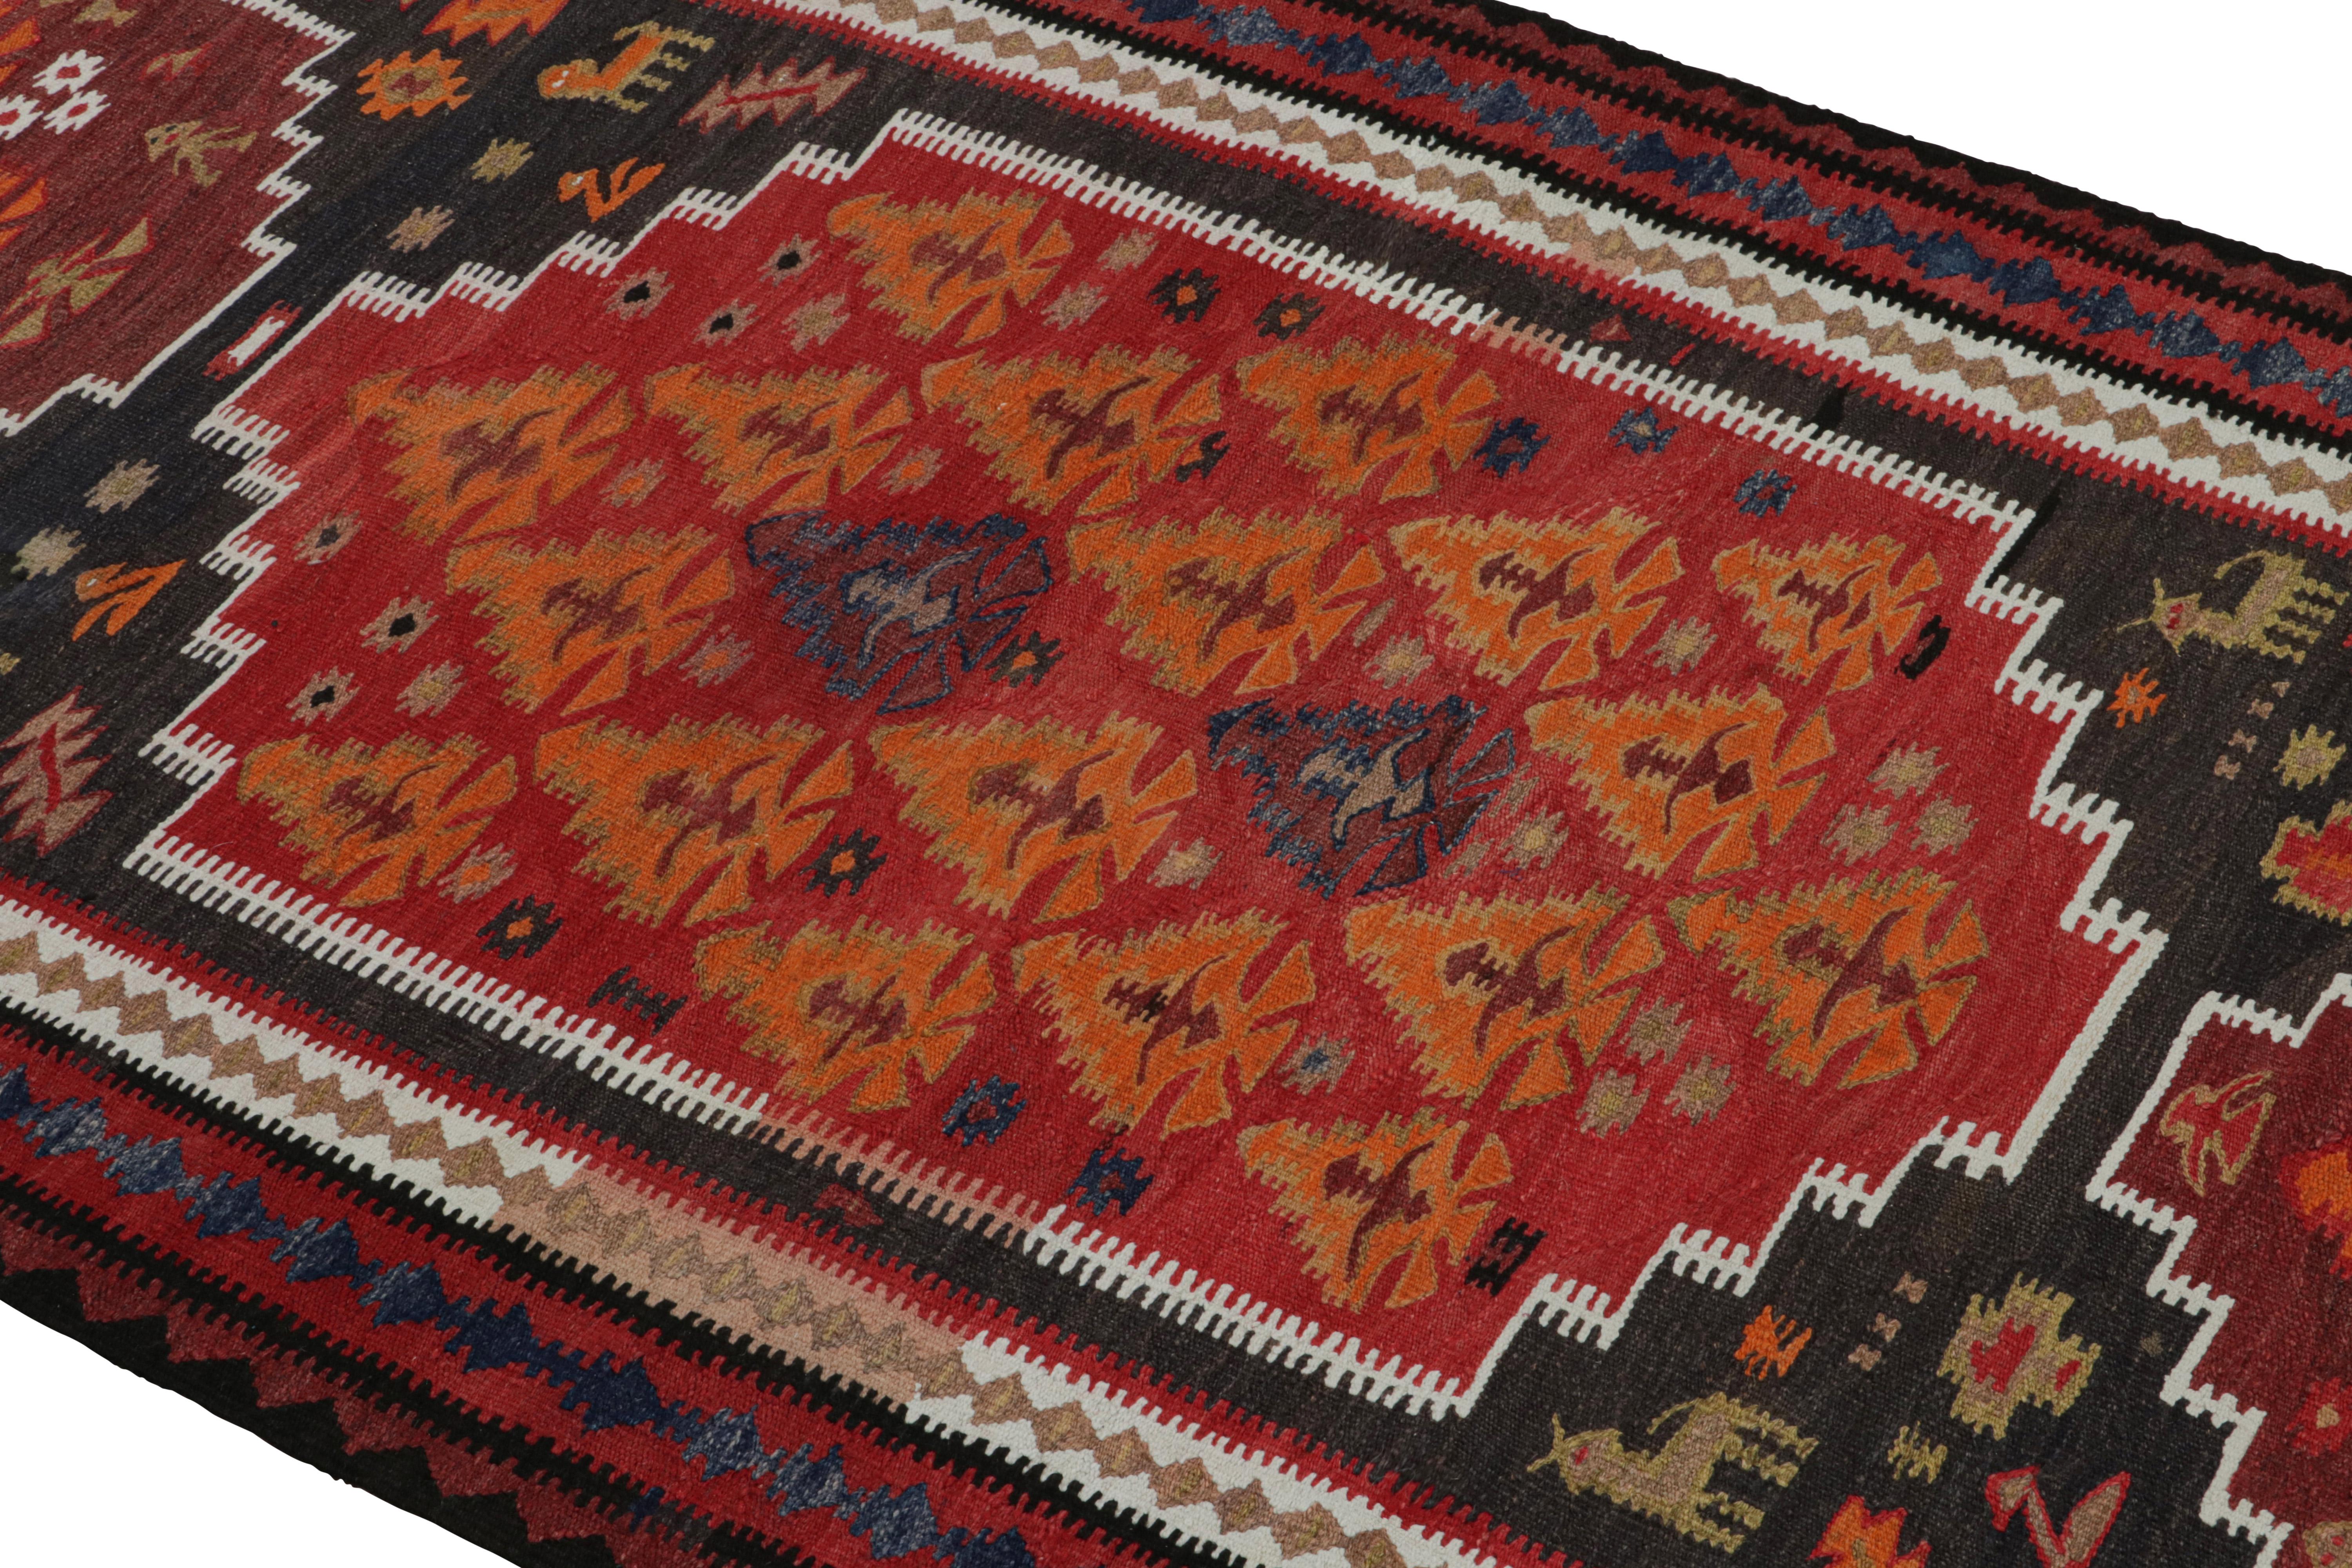 Tribal Vintage tribal Persian Kilim runner rug, with Pictorial motifs, from Rug & Kilim For Sale